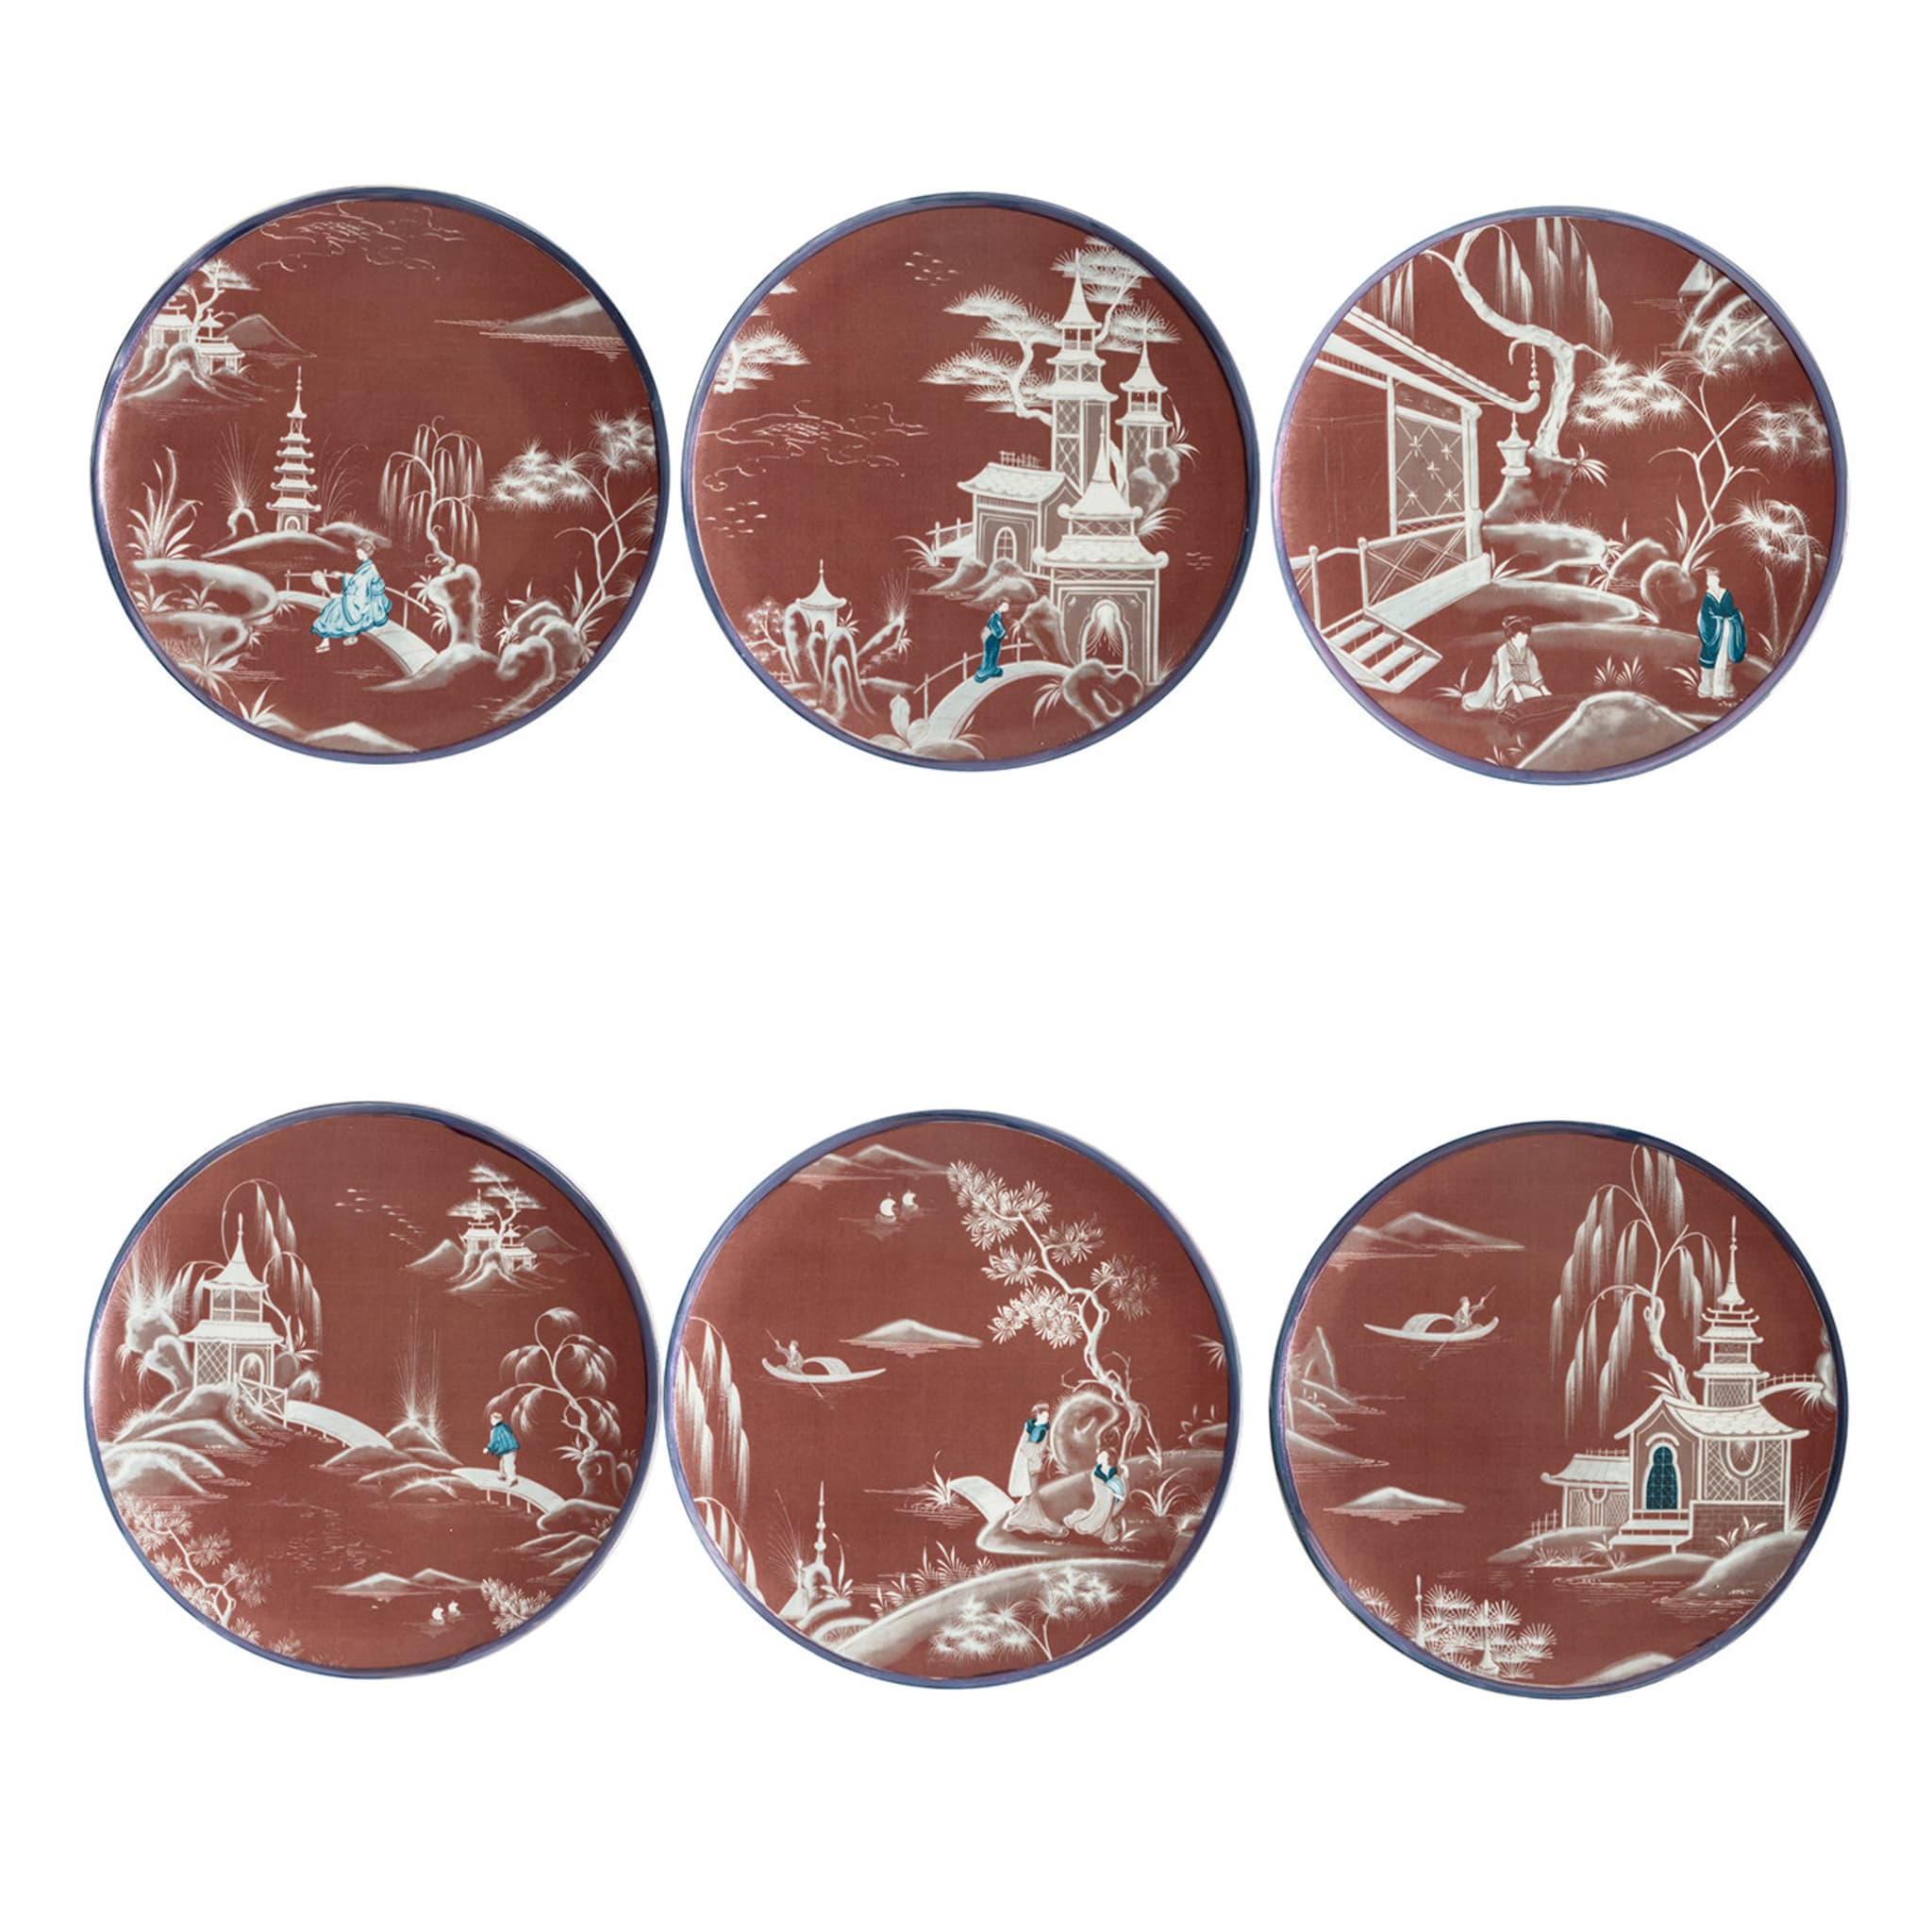 Natsumi Red Set of 6 Dinner Plates - Main view